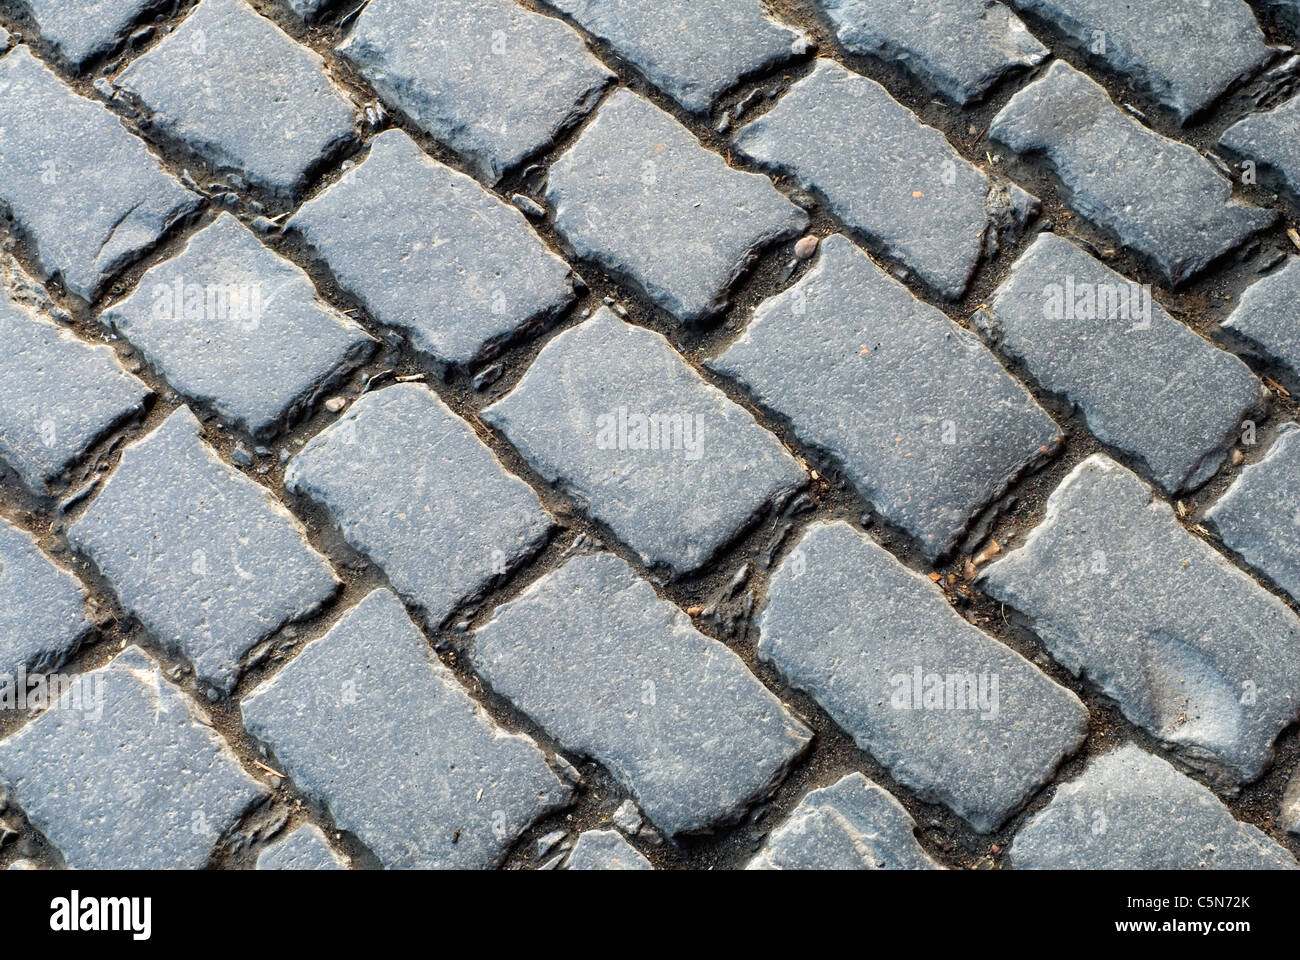 High angle view of old cobblestone street on diagonal. Original setts, commonly called Belgian Block pavers or cobblestones, Portland, Oregon Stock Photo